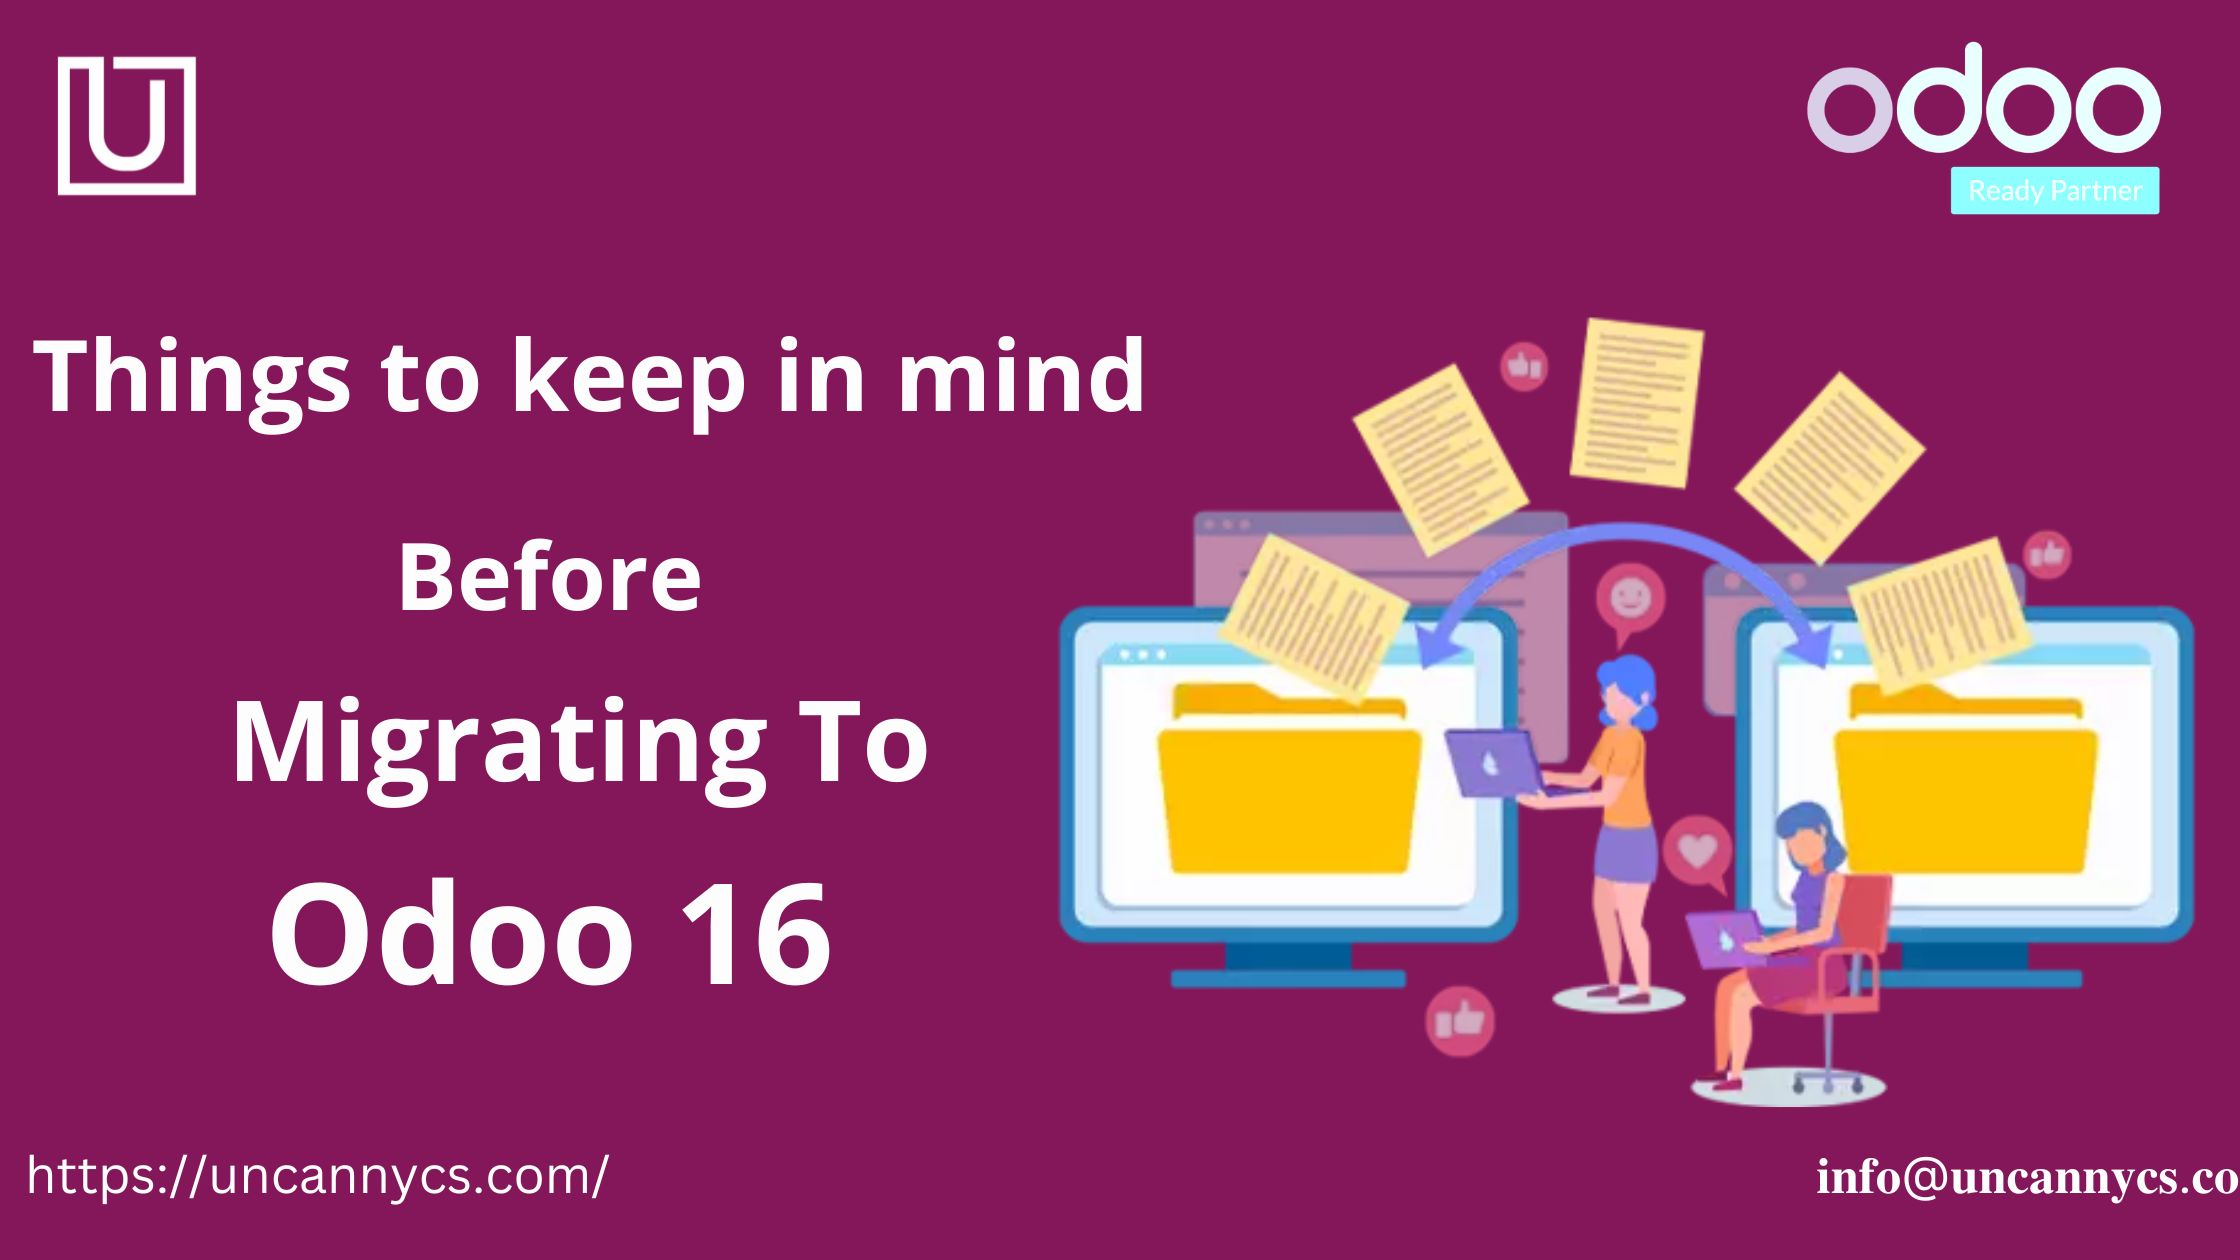 Things to keep in mind before migrating to Odoo 16